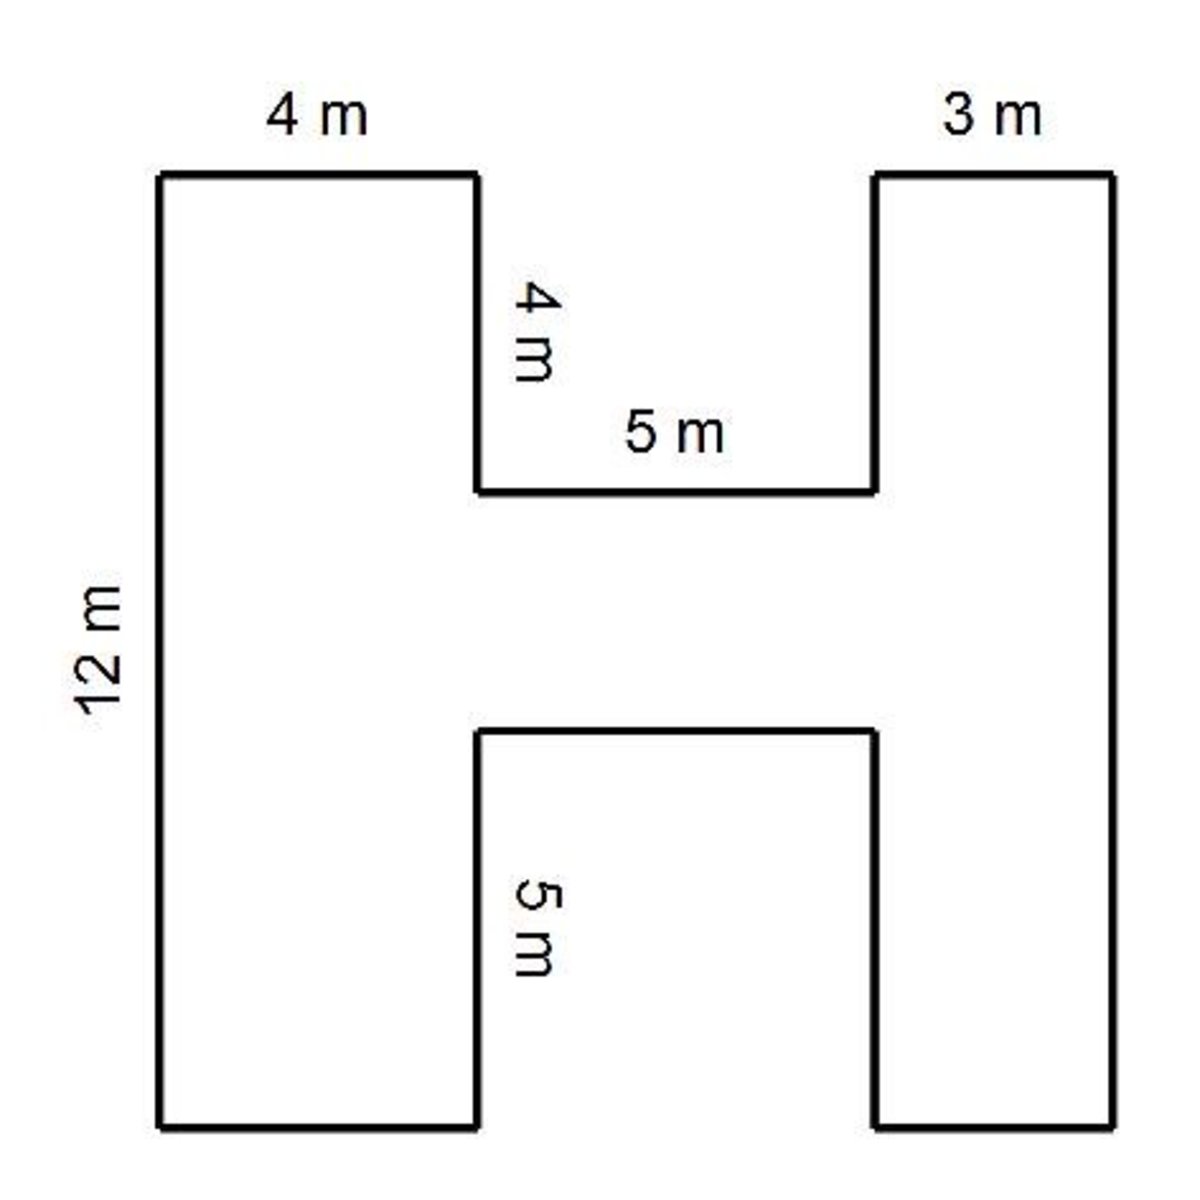 compound-h-shapes-calculating-the-area-of-this-h-shape-by-splitting-it-up-into-3-rectangles